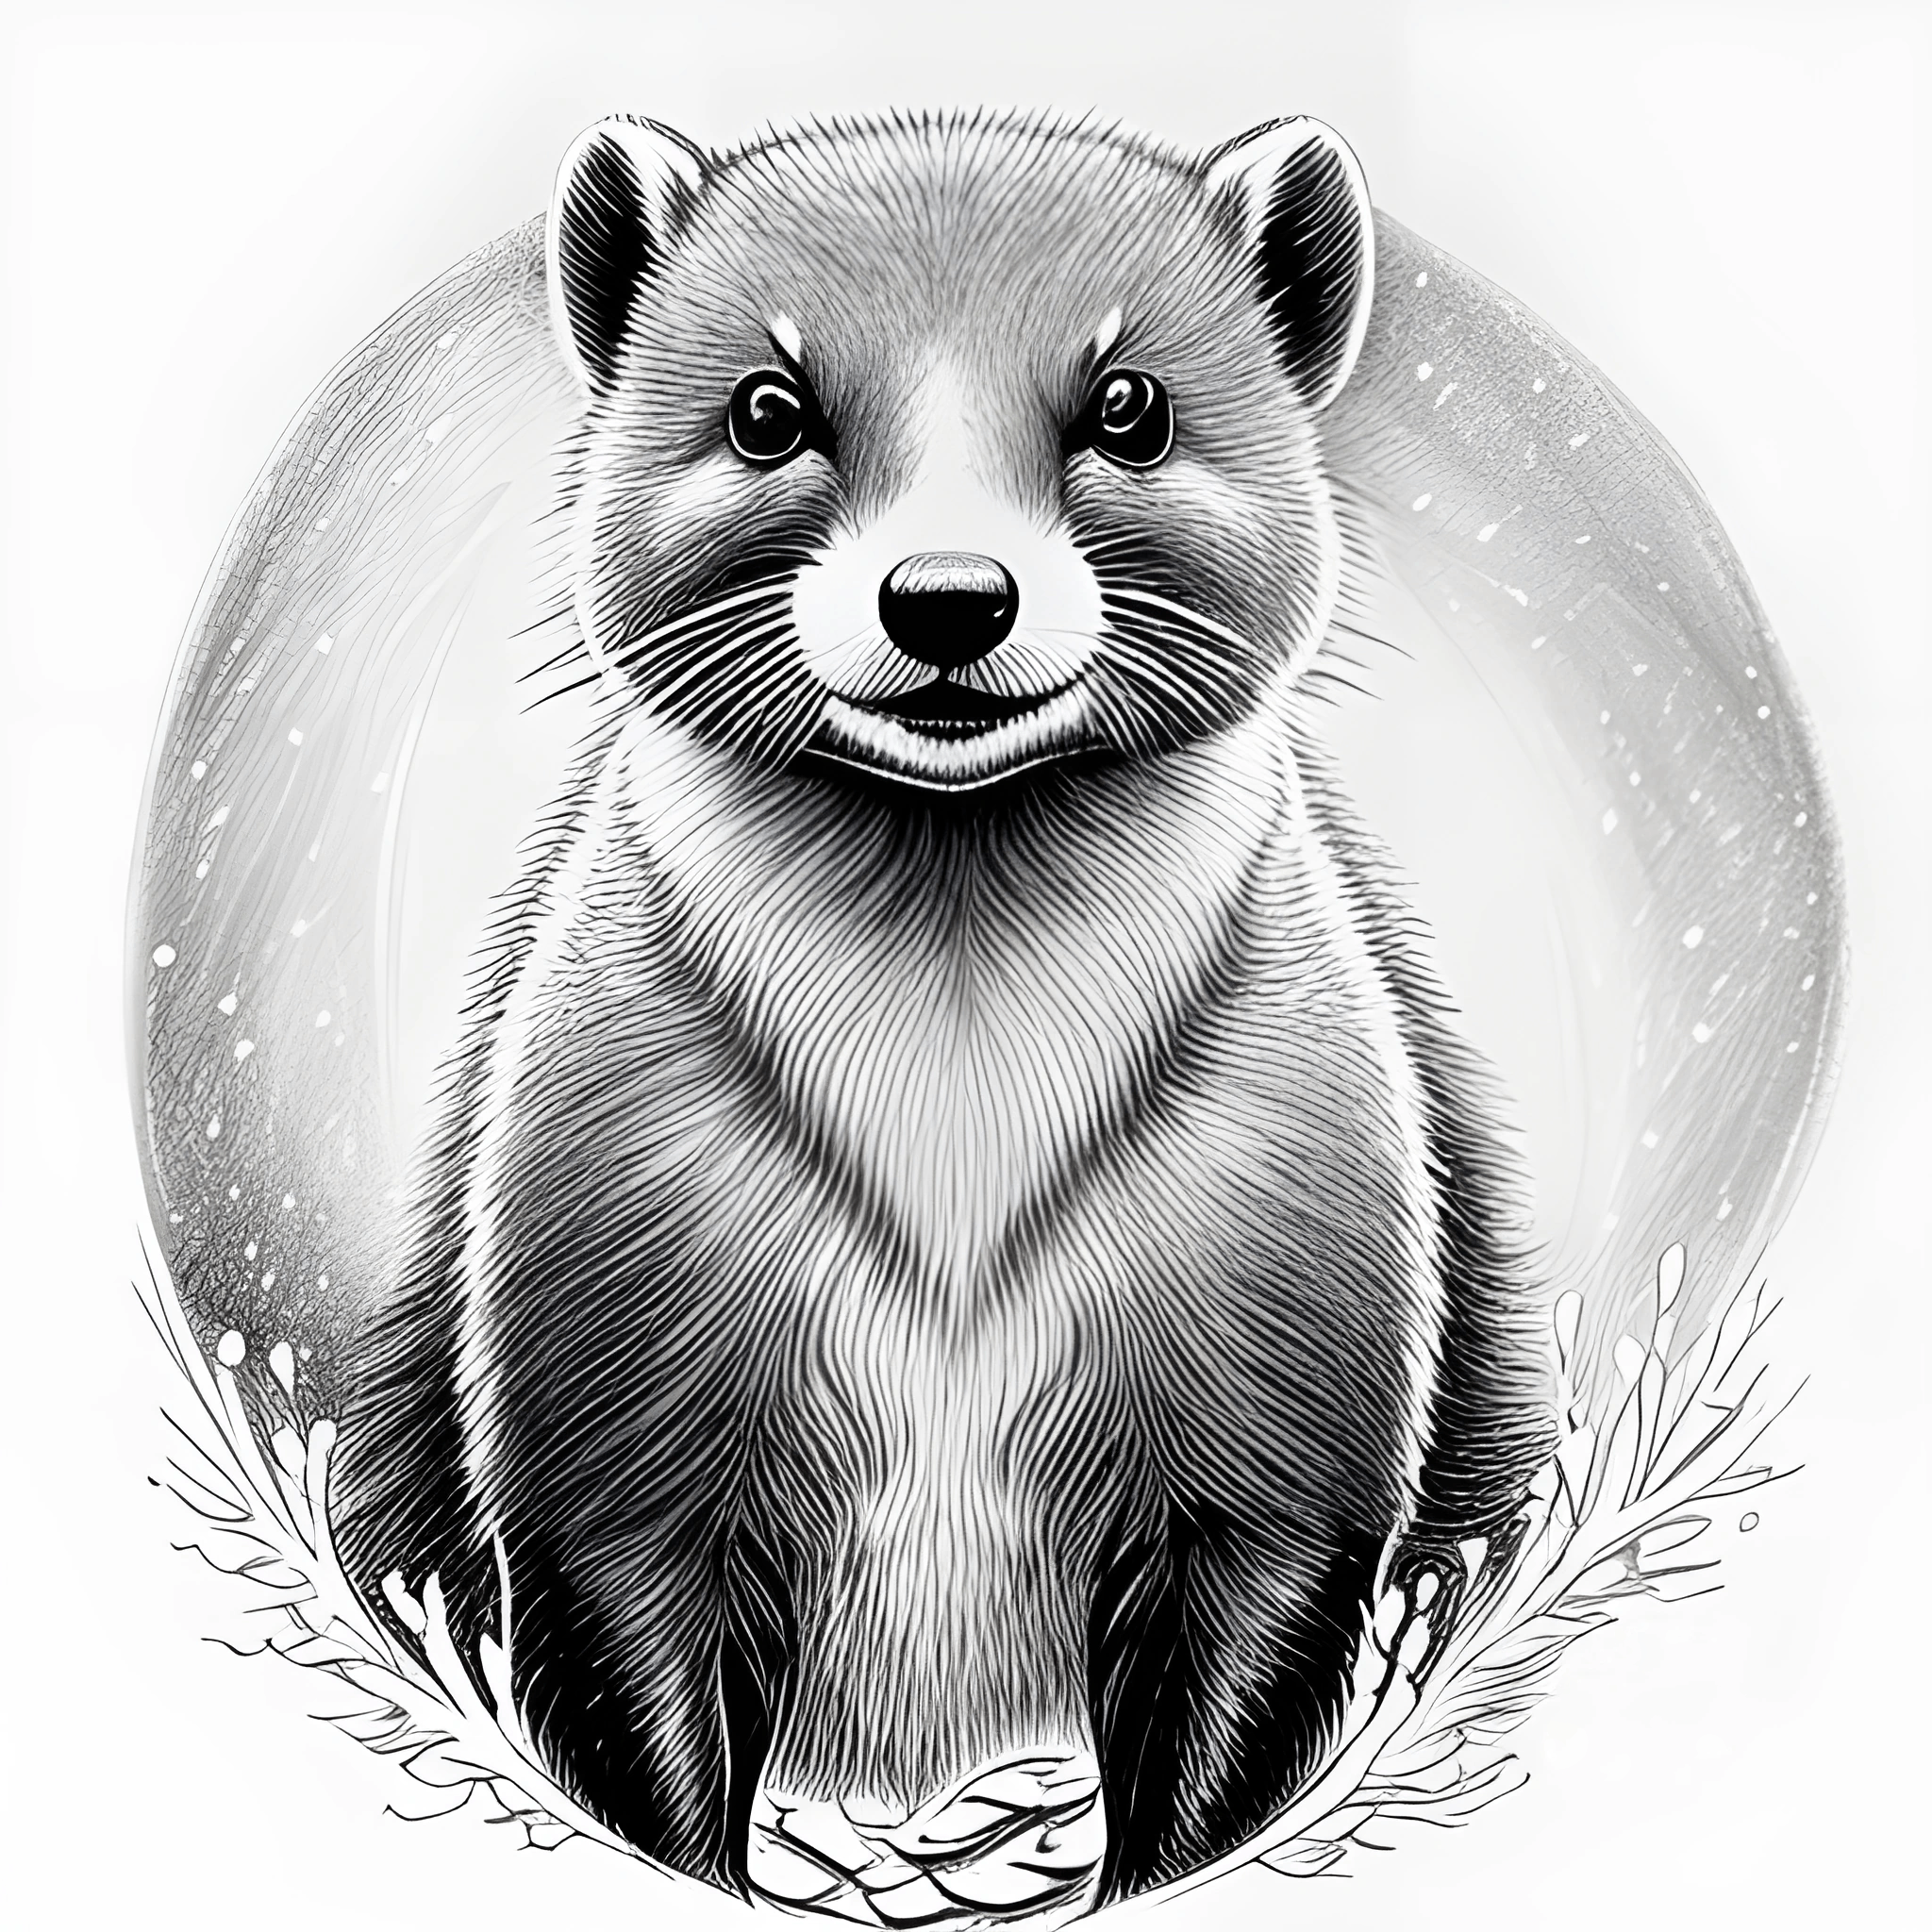 a black and white drawing of a small animal